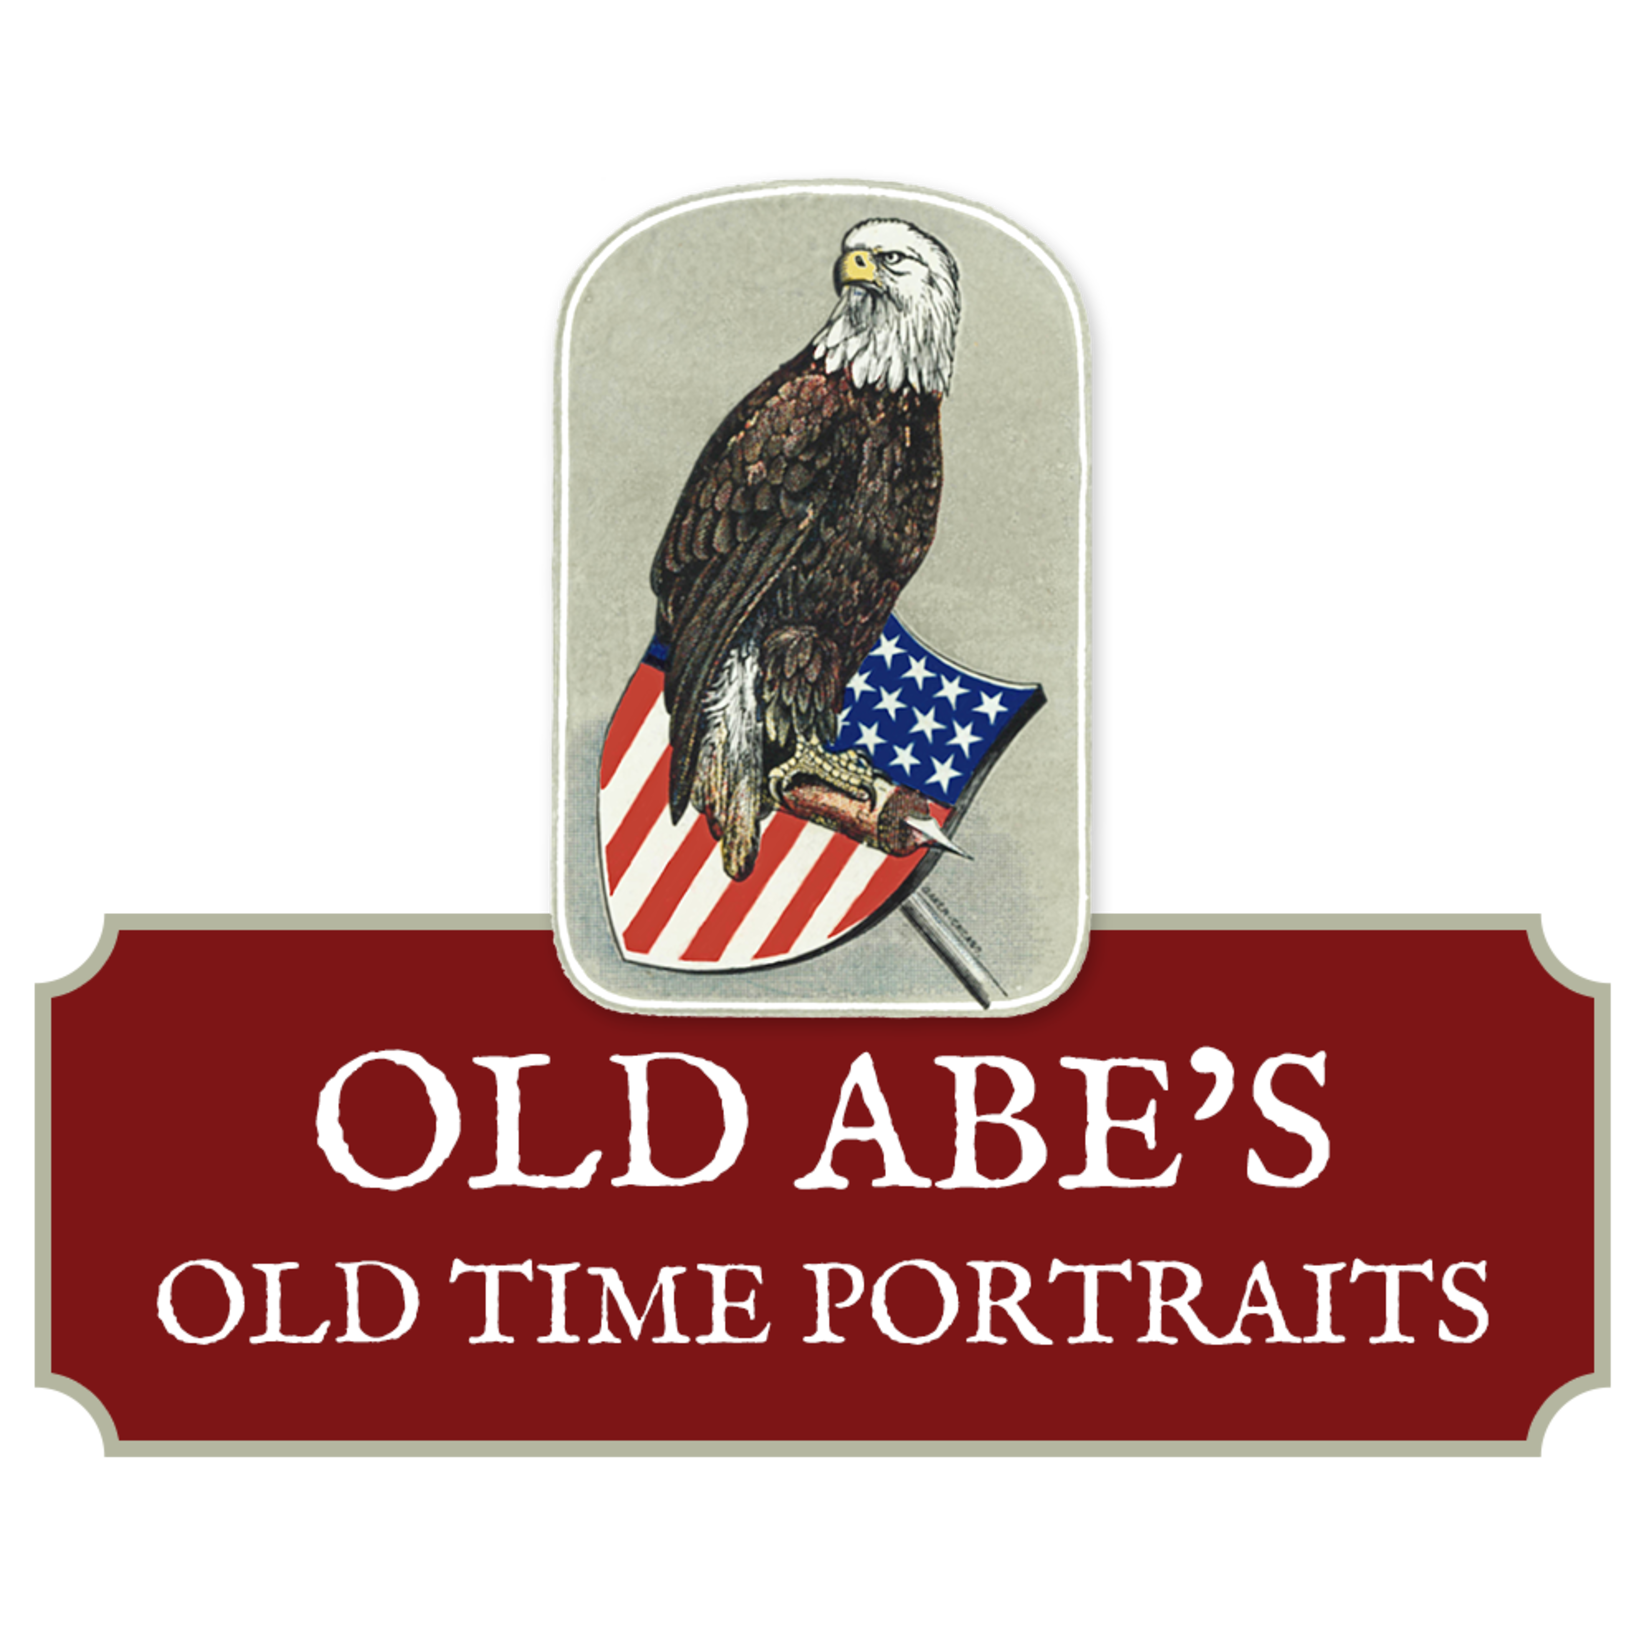 Old Abe's Old Time Portraits Old Abe's Old Time Portraits-Wisconsin Dells (limit 1 season)